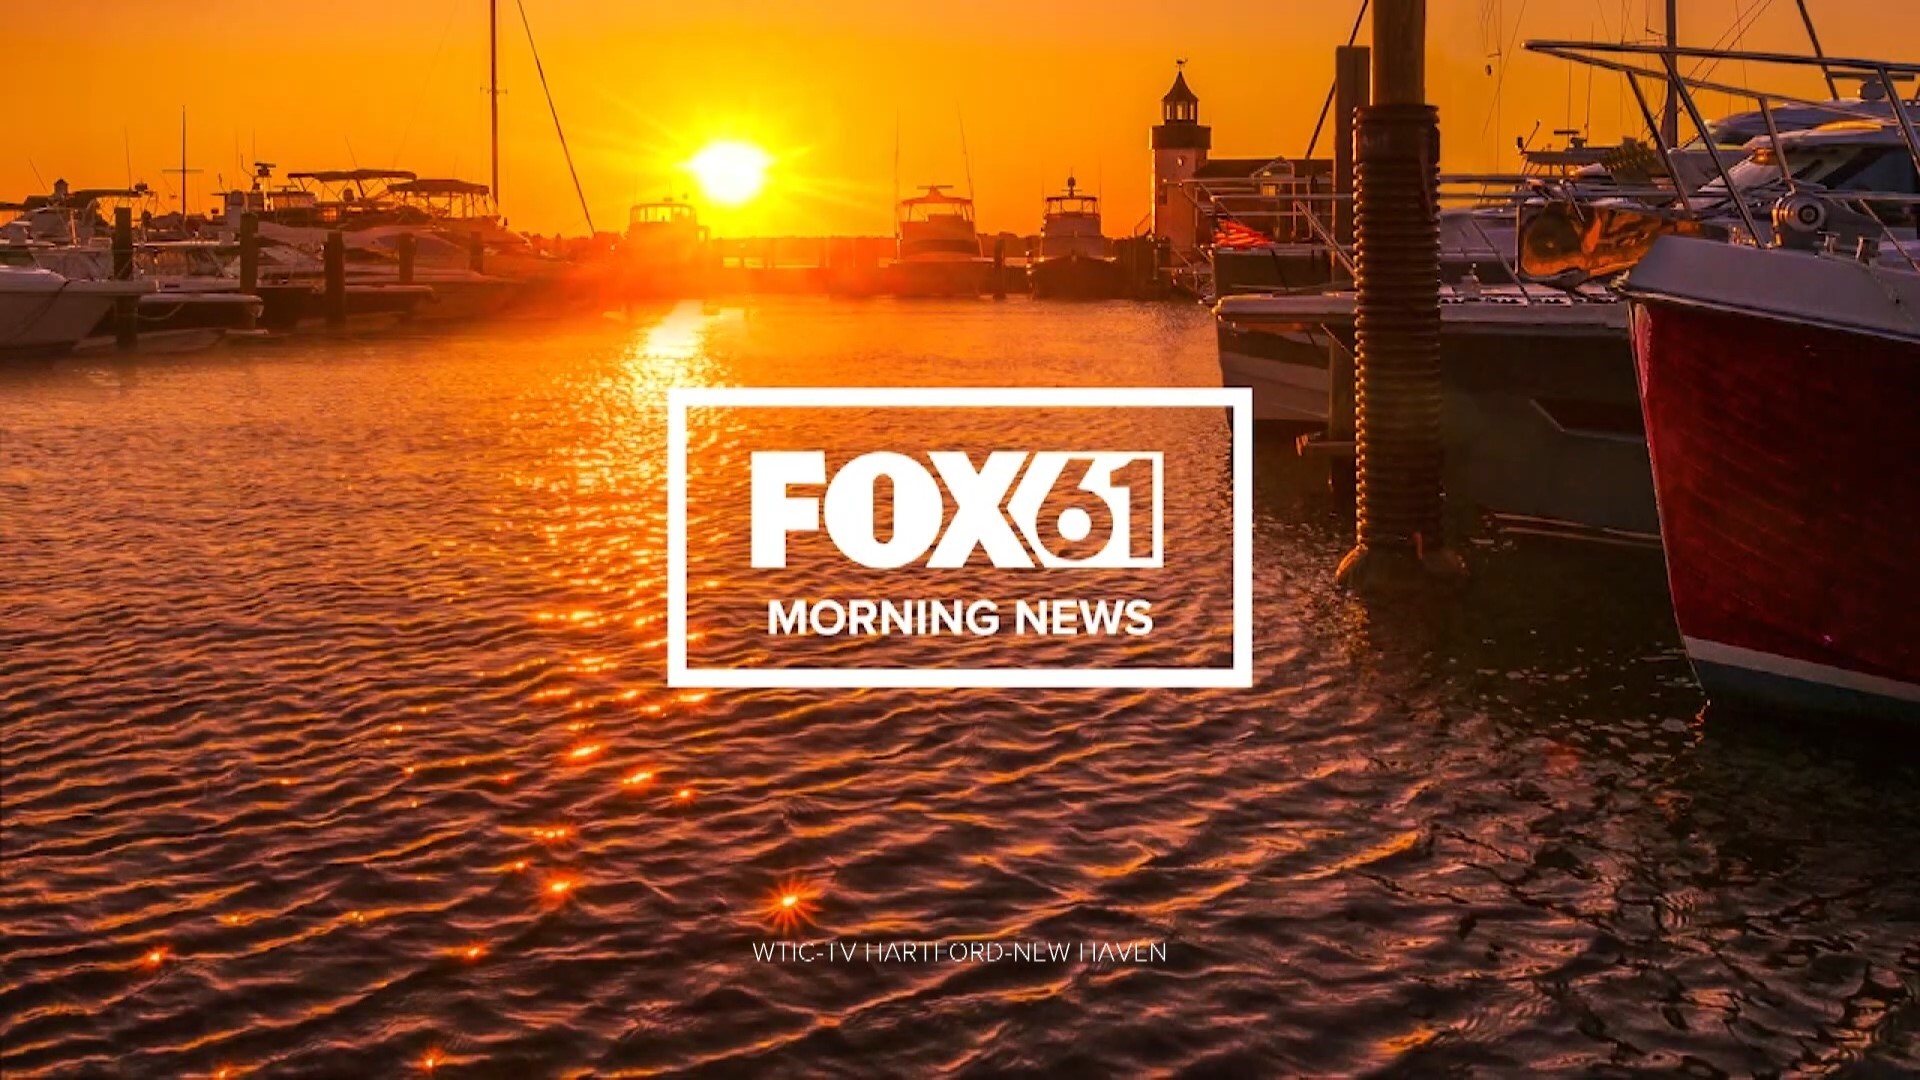 Here are the top stories for the morning of August 16 in Connecticut.